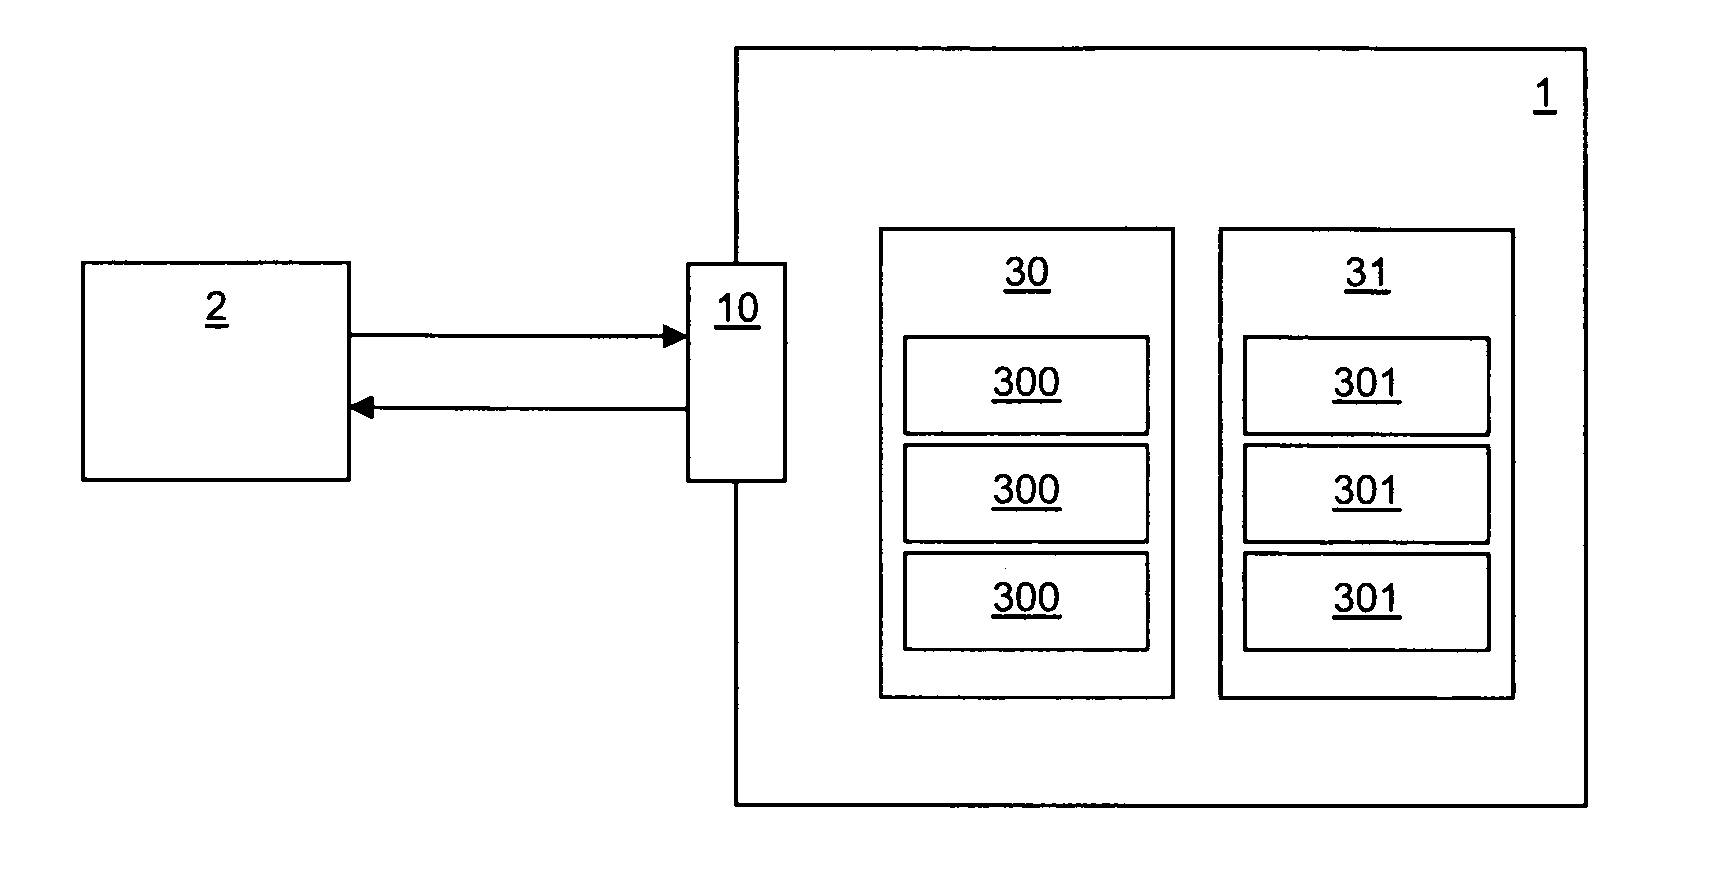 Connection handler and method for providing applications with heterogeneous connection objects